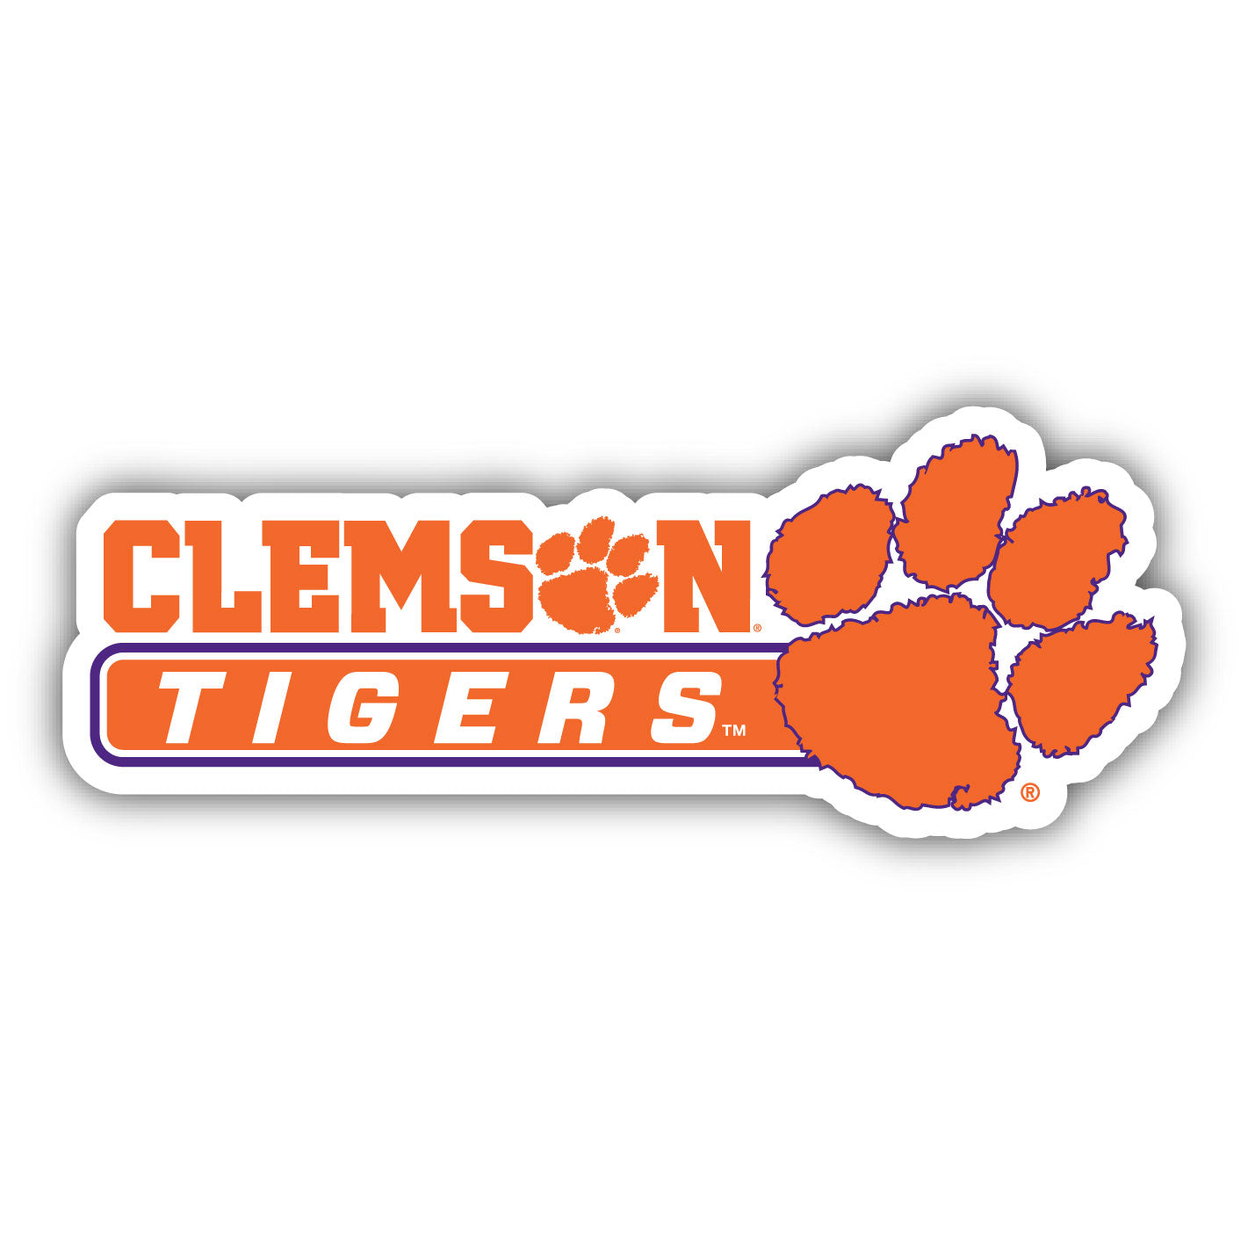 Clemson Tigers 4 Inch Wide Colorful Vinyl Decal Sticker